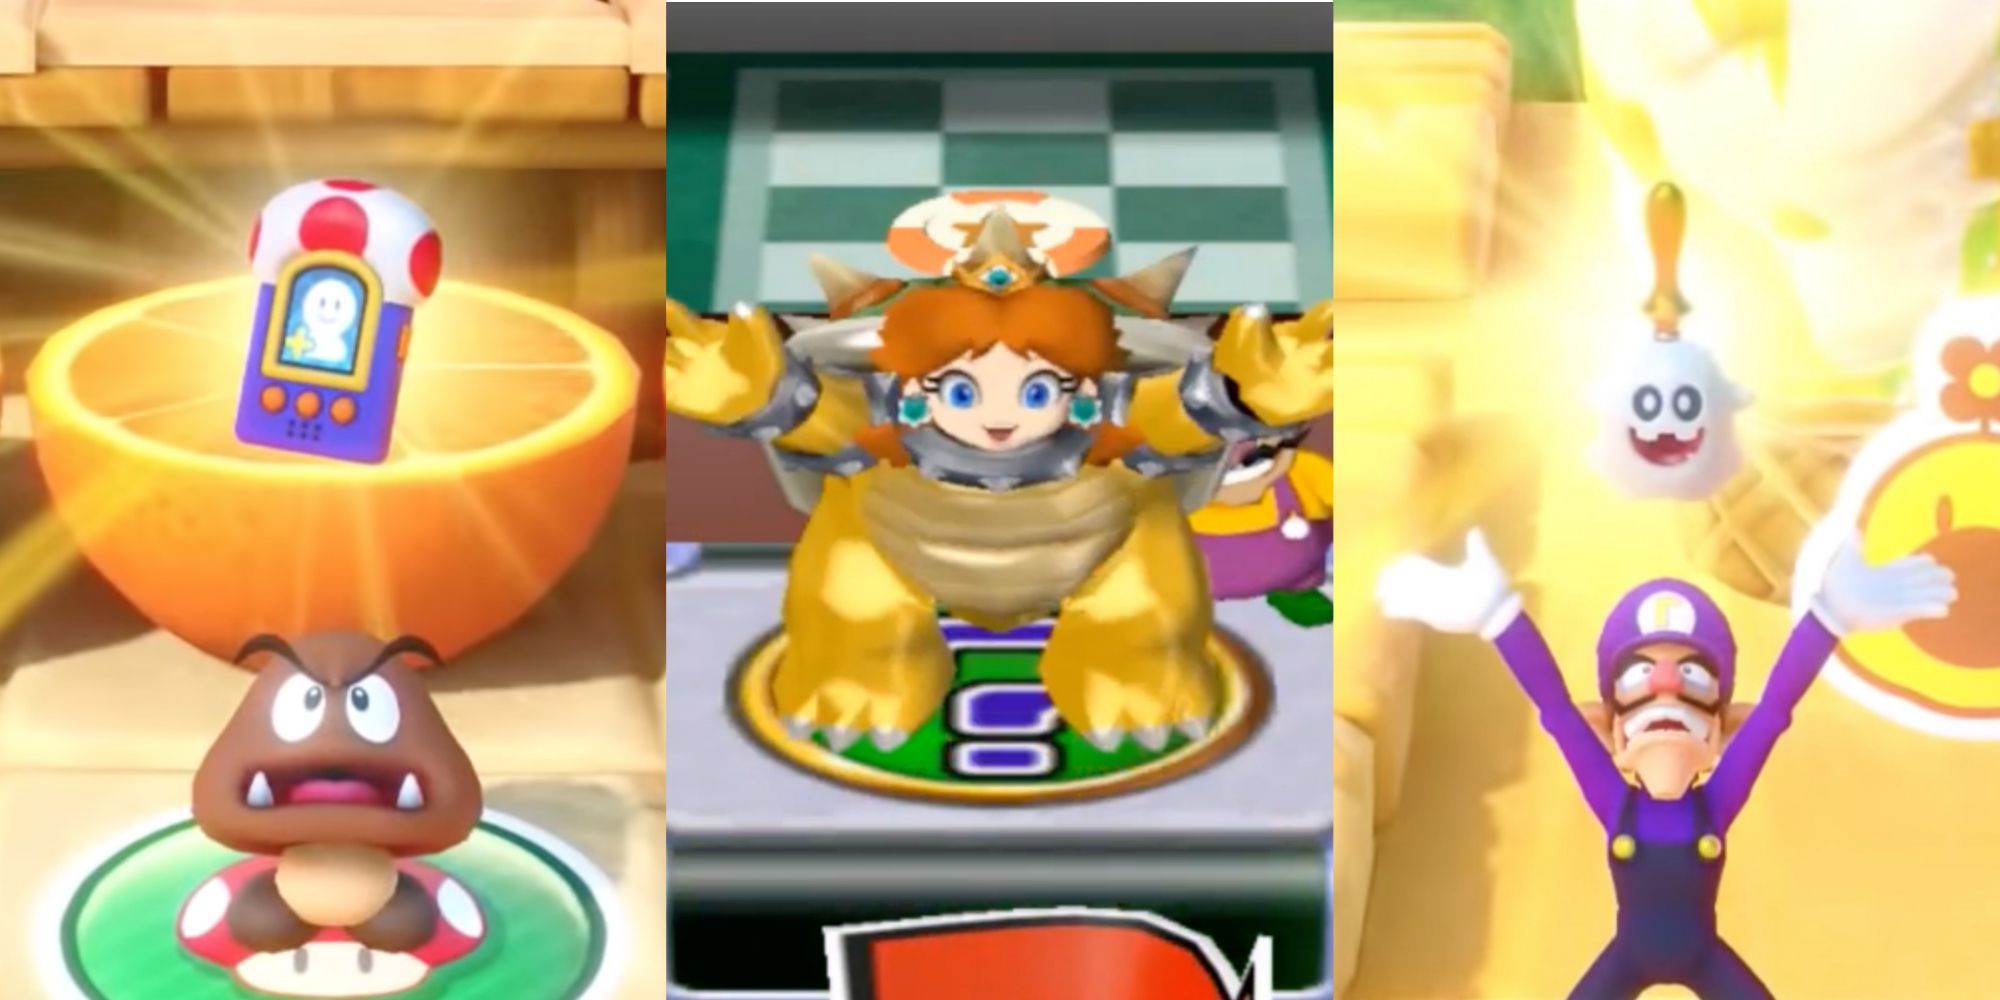 X Mario Party Items You'll Want To Steal From Your Opponents This Christmas Featuring Goomba with Ally Phone, Daisy with Bowser Suit, and Waluigi with Peepa Bell